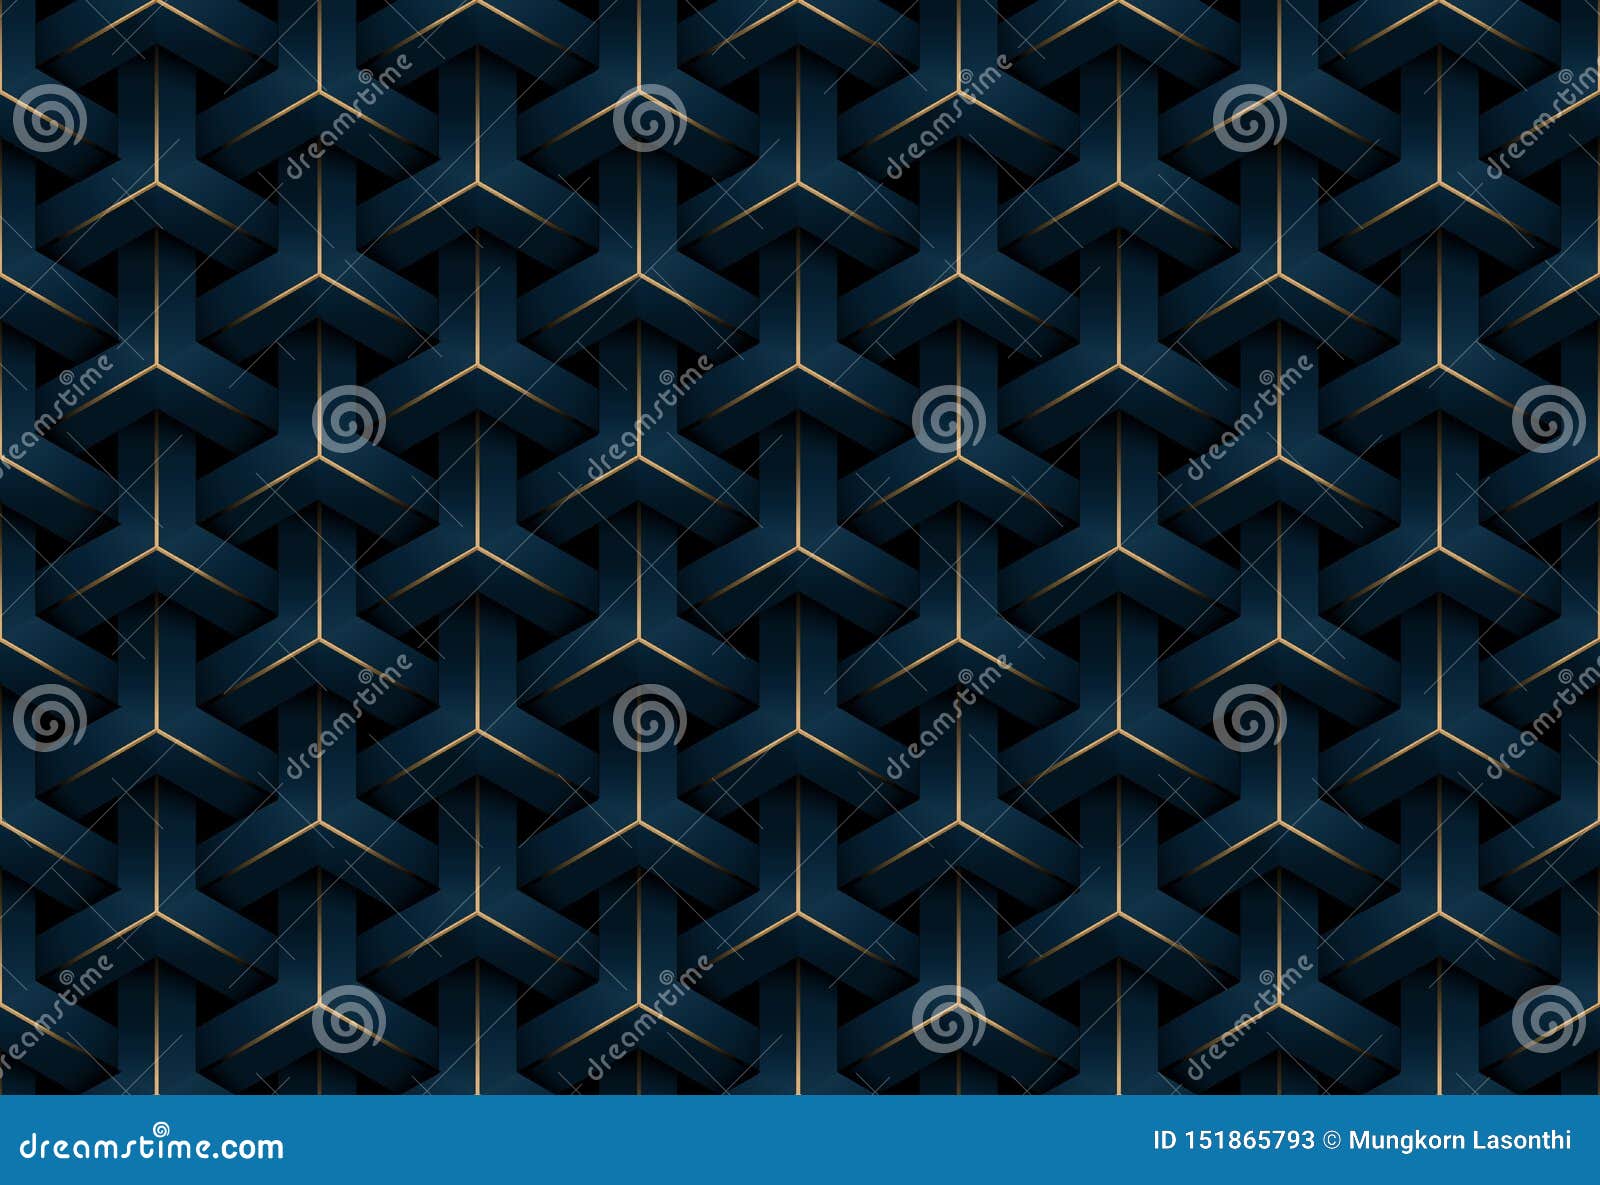 abstract seamless luxury dark blue and gold geometric pattern background